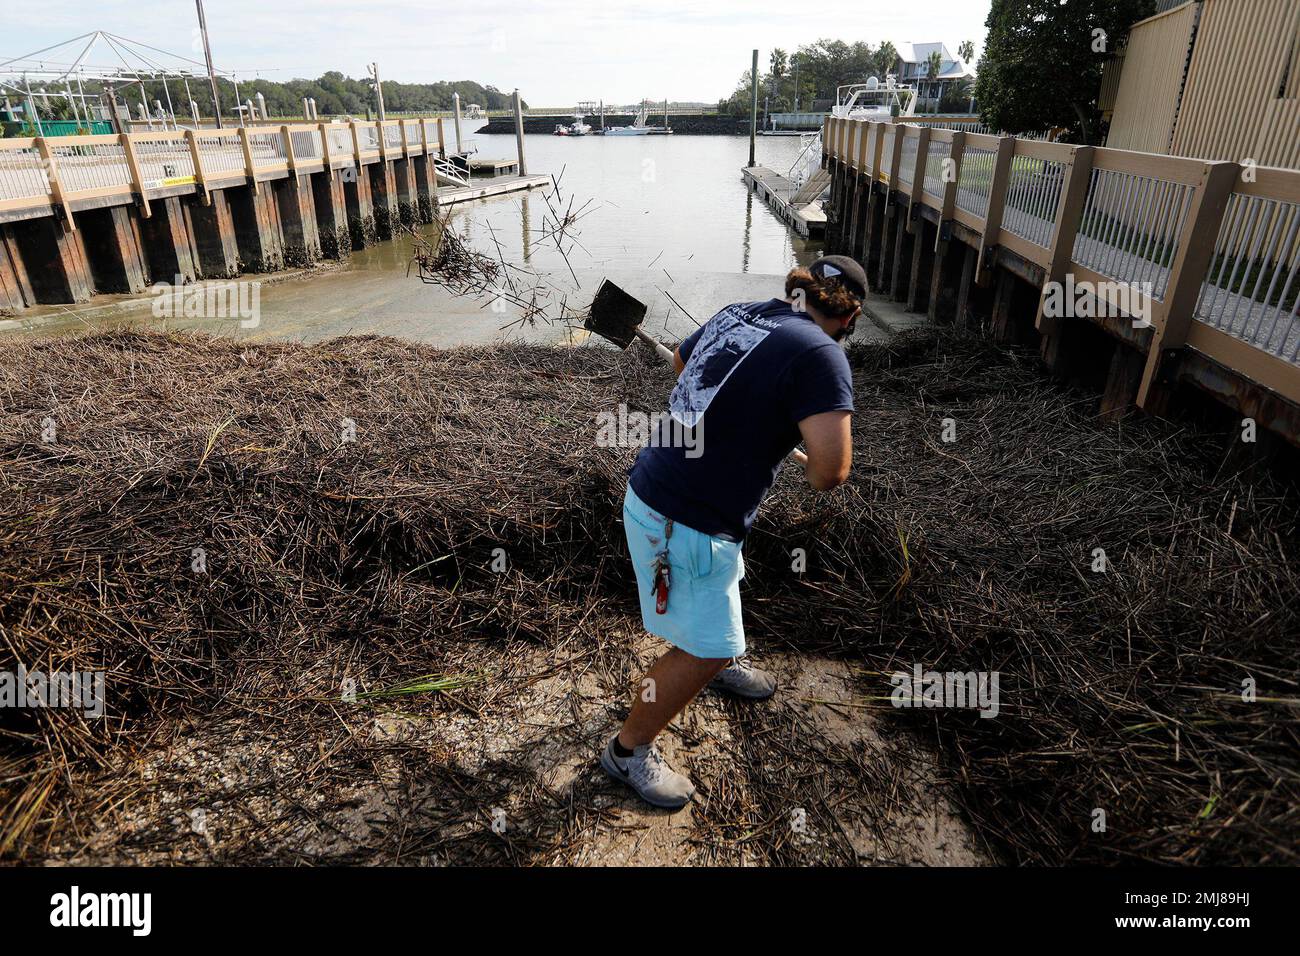 Walker Townsend clears marsh grass from the Isle of Palms marina boat  landing after Hurricane Dorian passed by the Isle of Palms, S.C., Friday,  September 6, 2019, in Charleston, S.C. (AP Photo/Mic